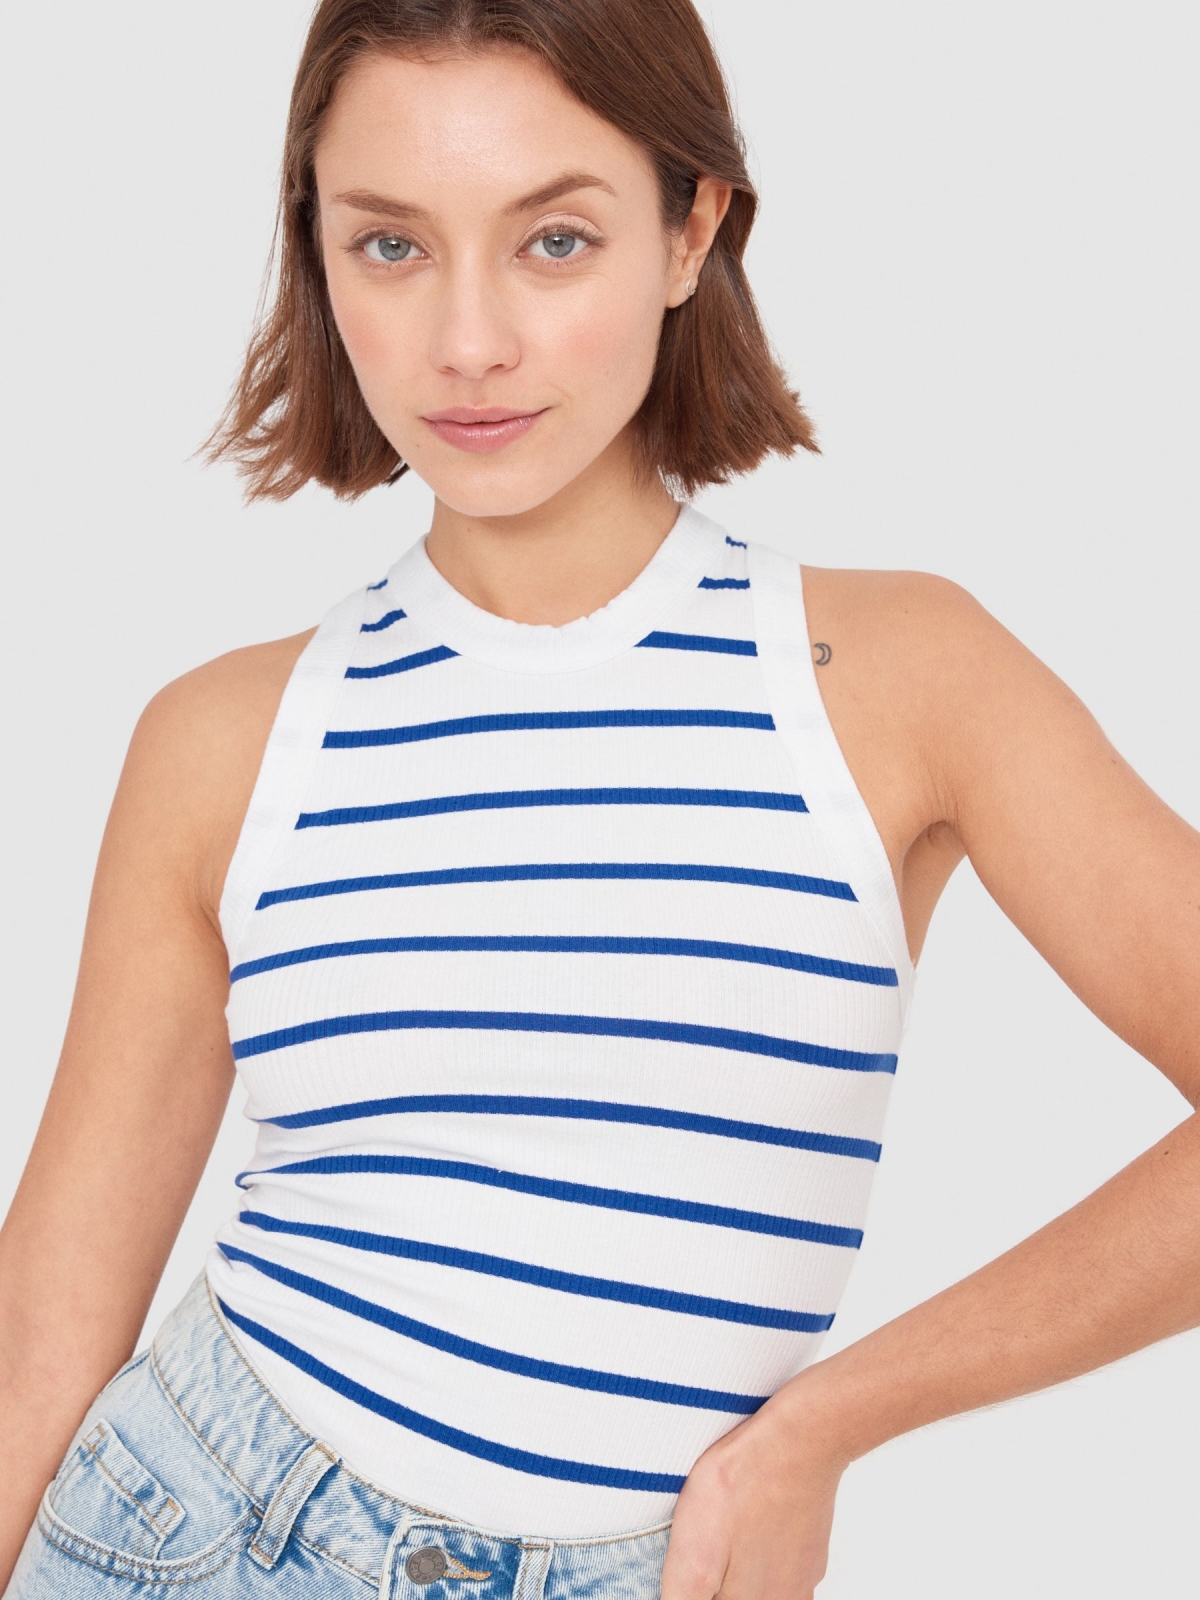 Sleeveless striped top blue detail view